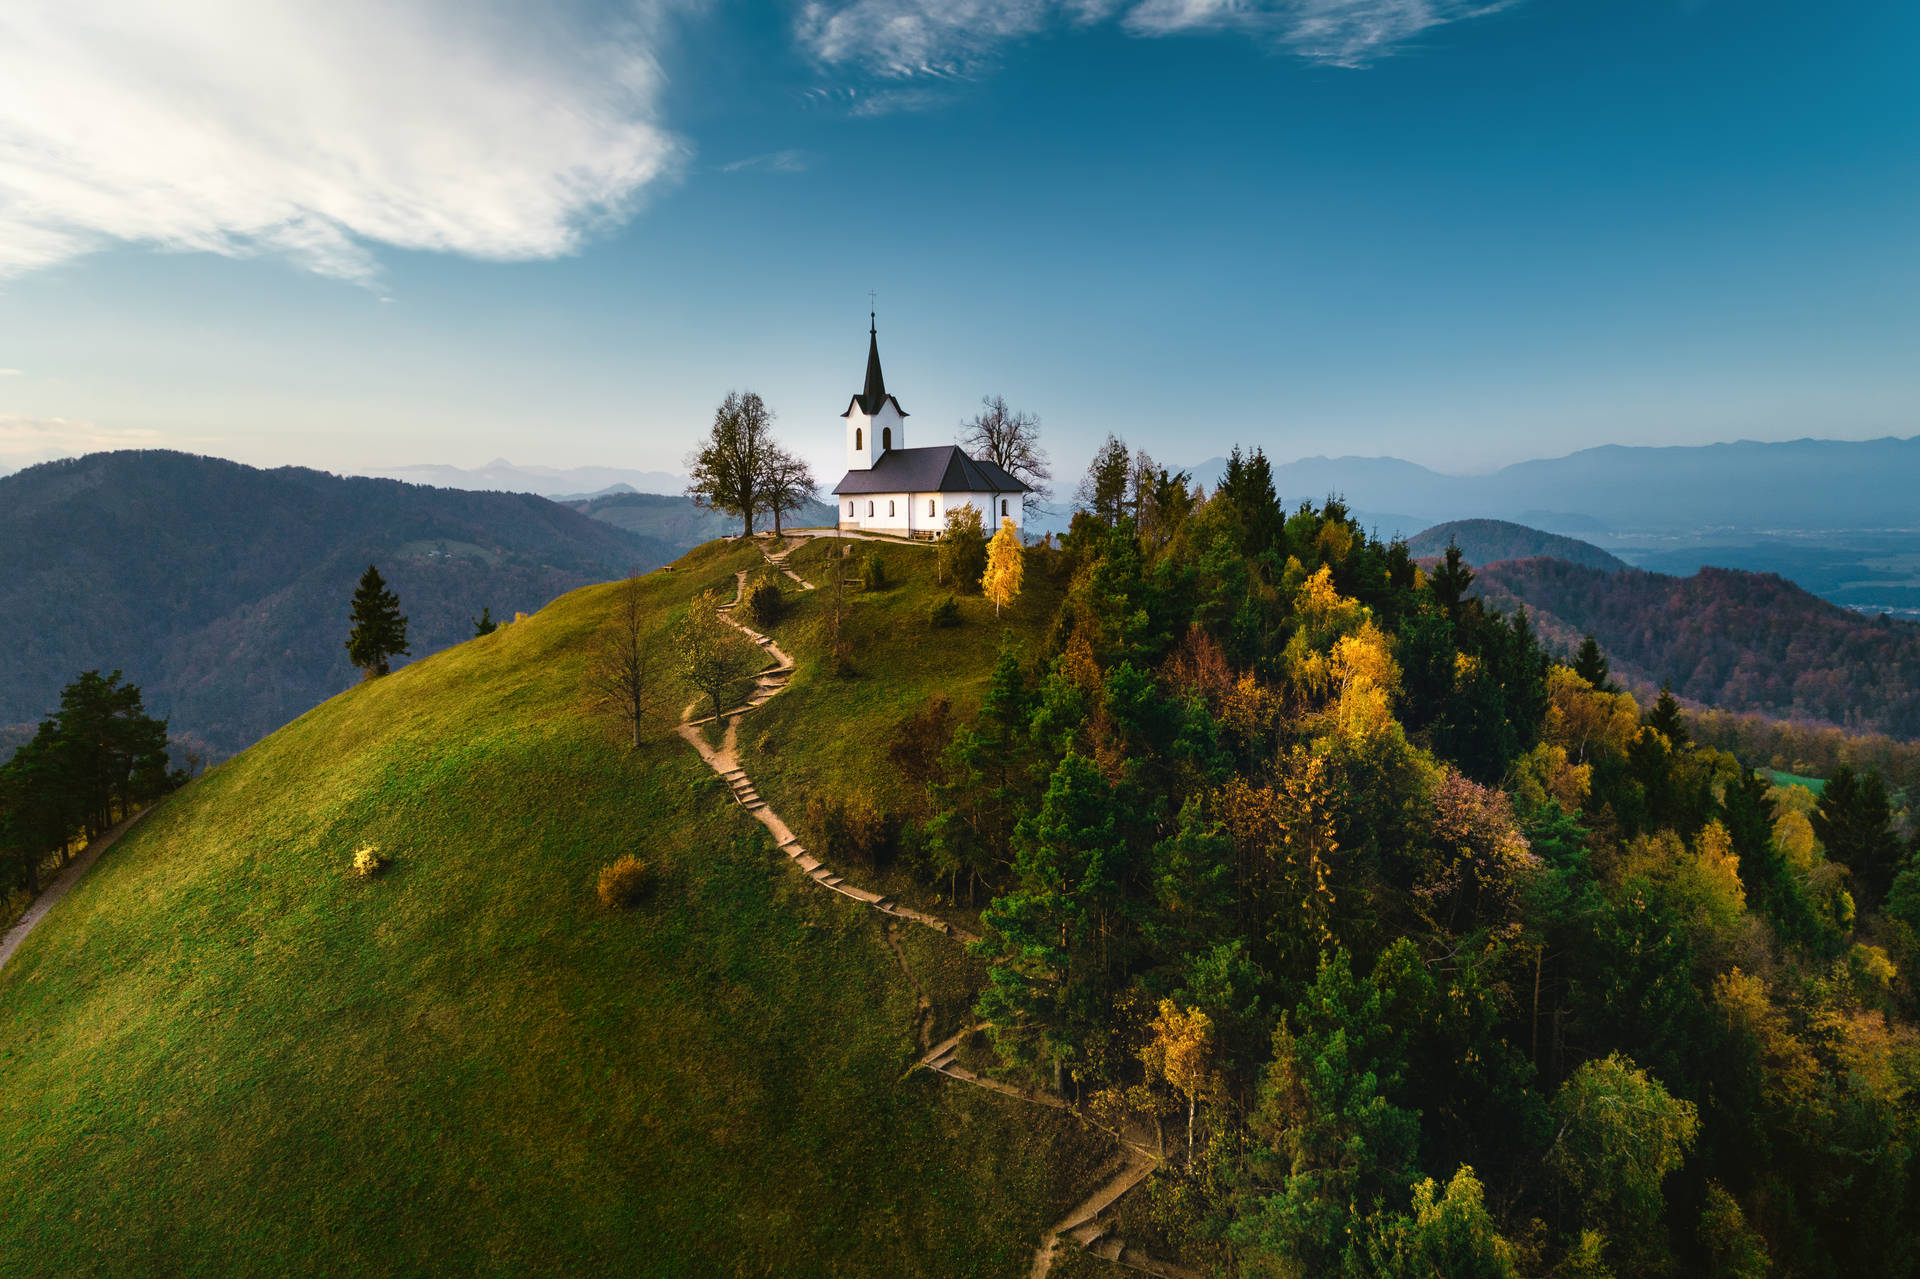 Hilltop Church Overlooking Scenic Countryside Landscape